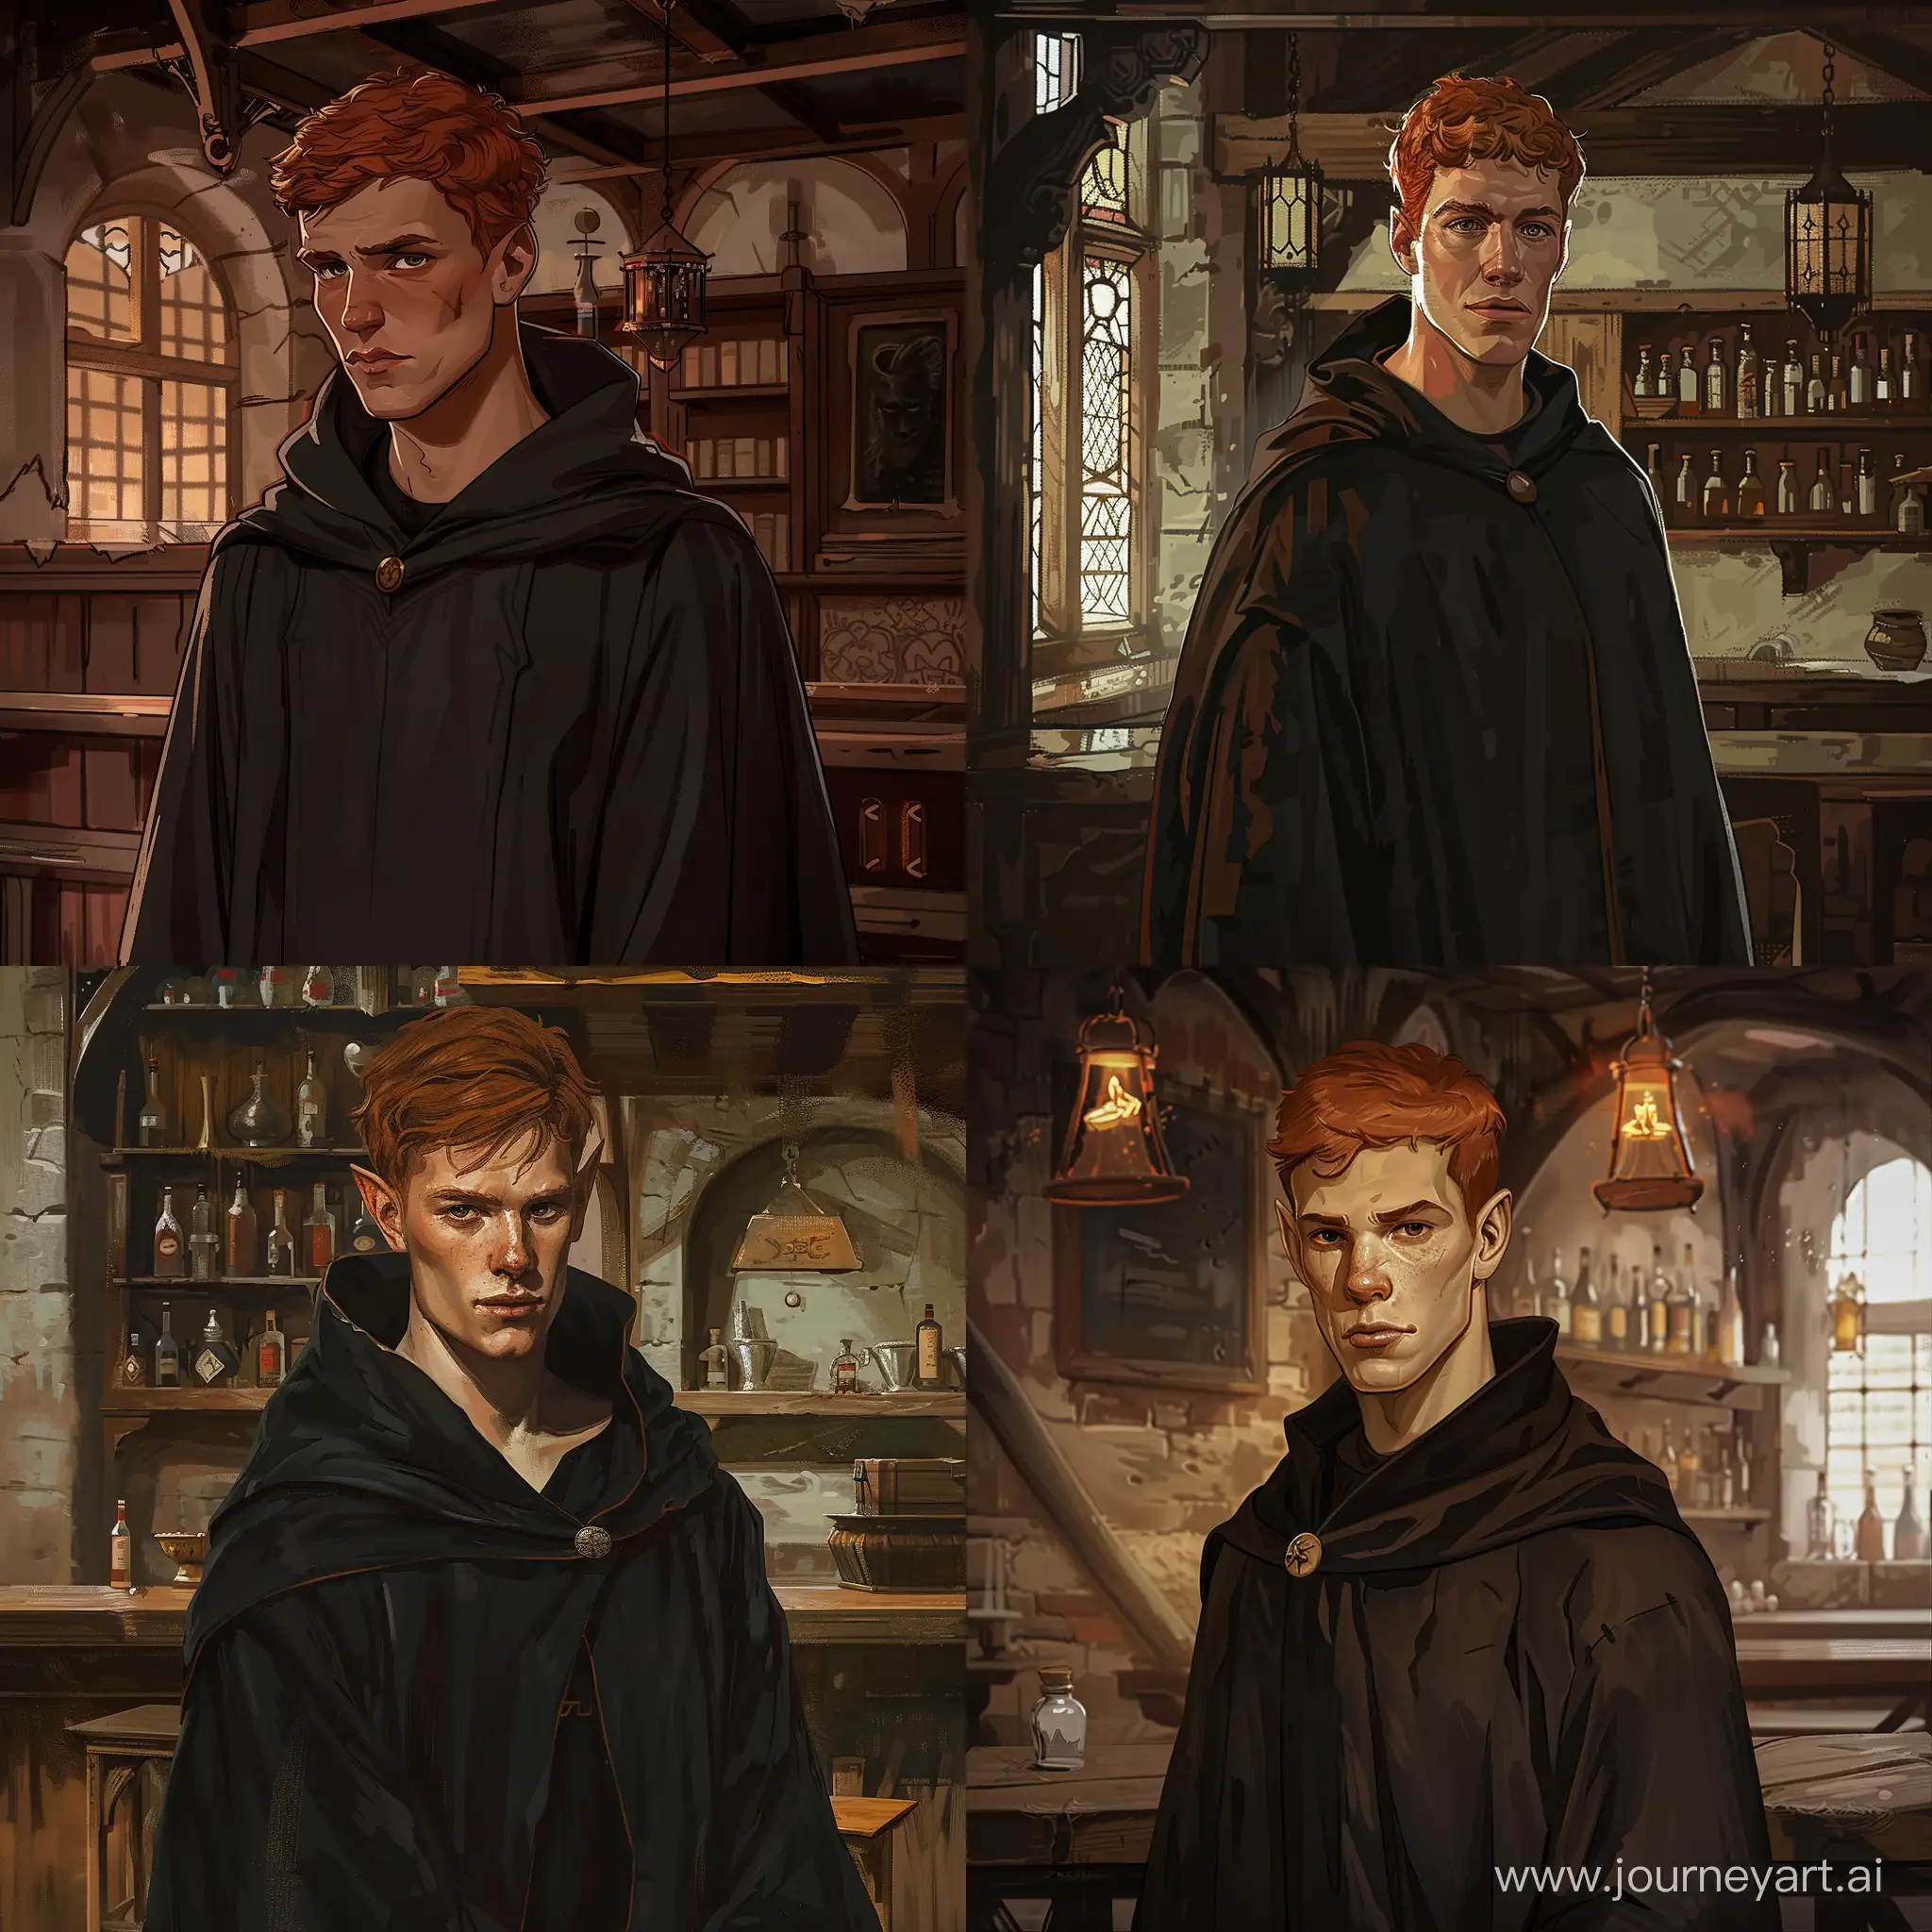 cool, young, 25 years old, human, wizard and monk, d&d character, charismatic, serious, short red hair, simple black aprentice robes. he is alone in an old tavern, full body, realistic drawing 2d art style